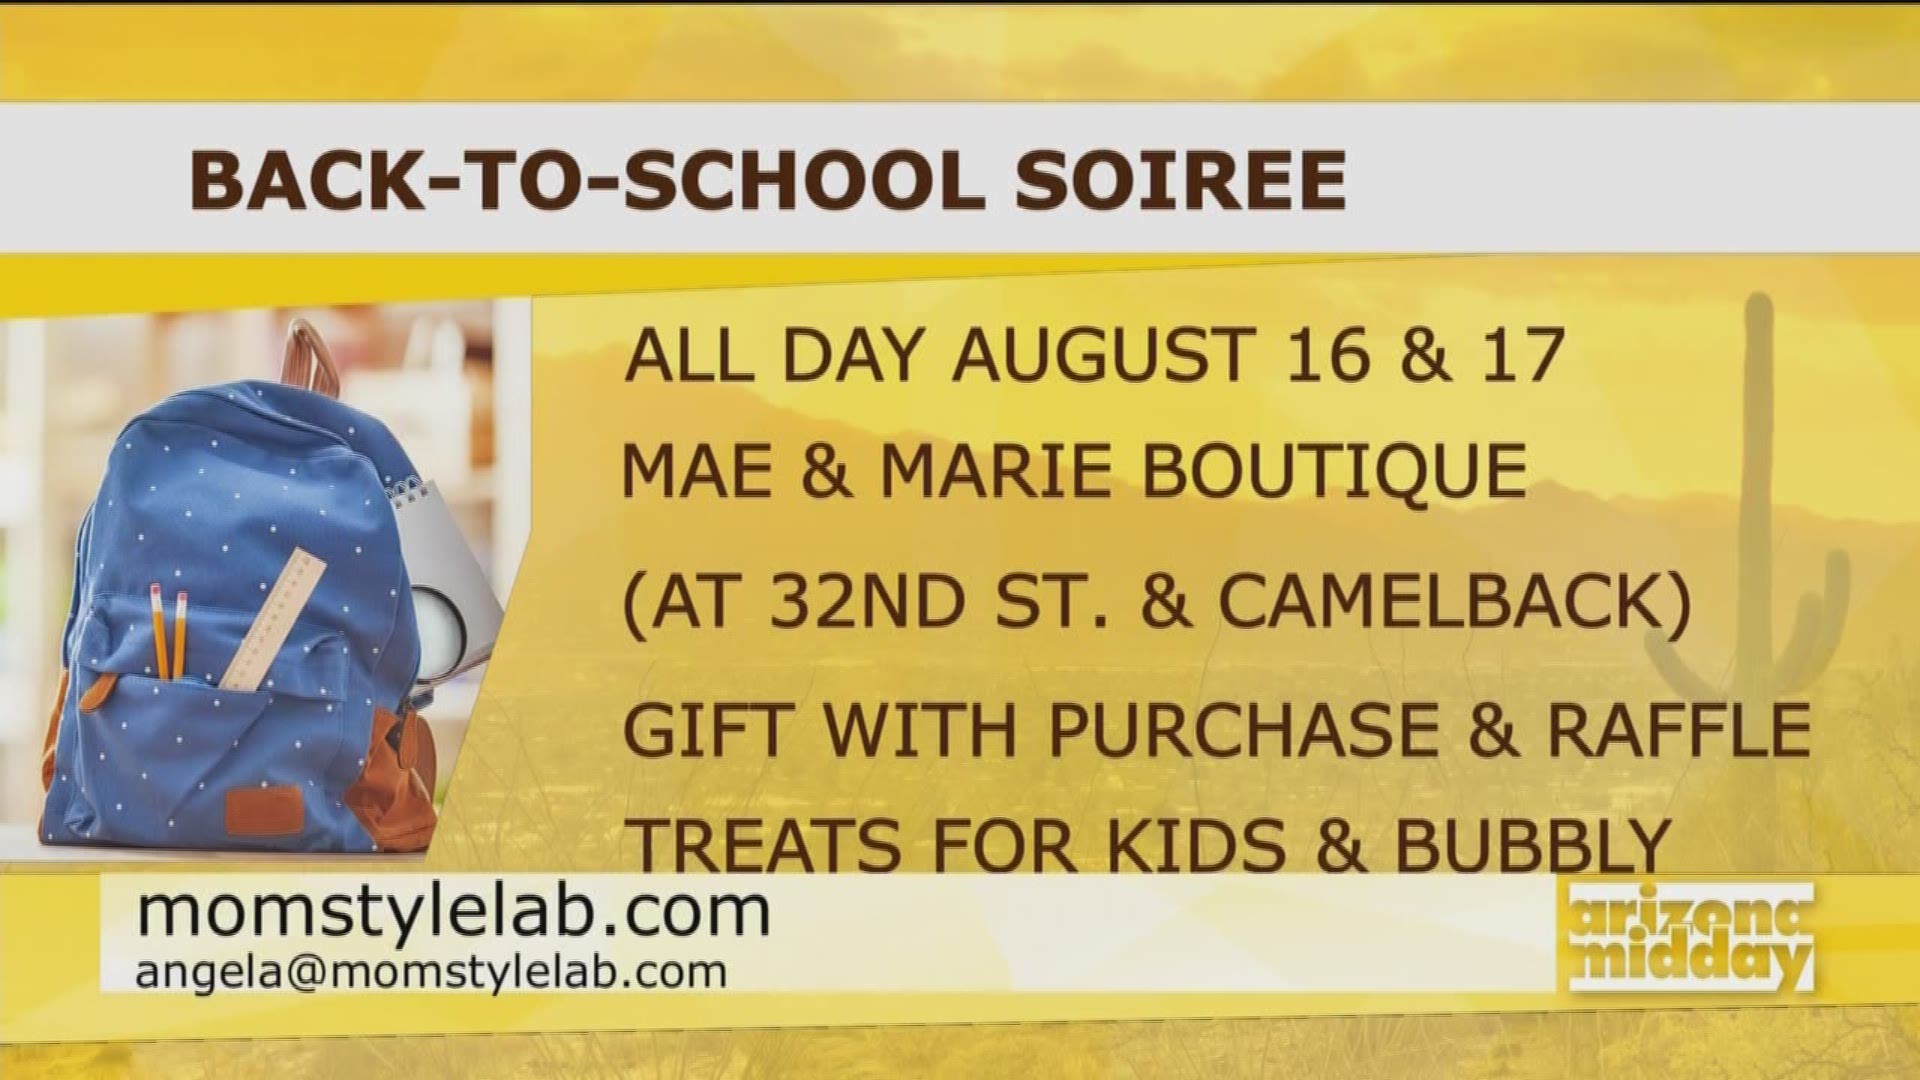 Angela Keller with Mom Style Lab shows us the trends for this years back to school season